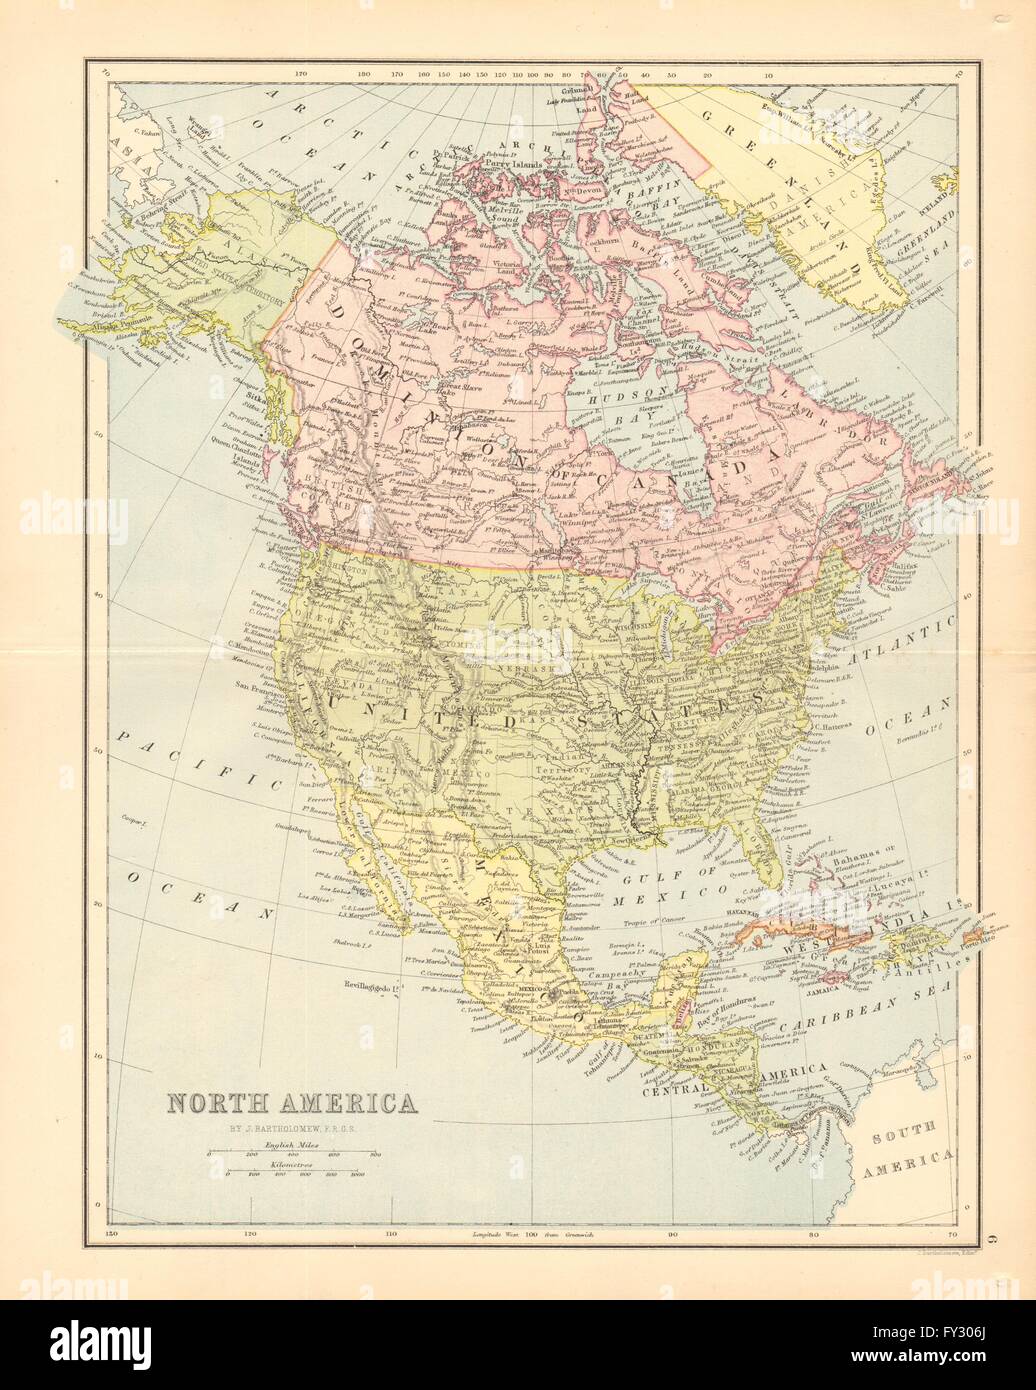 NORTH AMERICA. Shows part of Greenland as Canadian. BARTHOLOMEW, 1876 old map Stock Photo